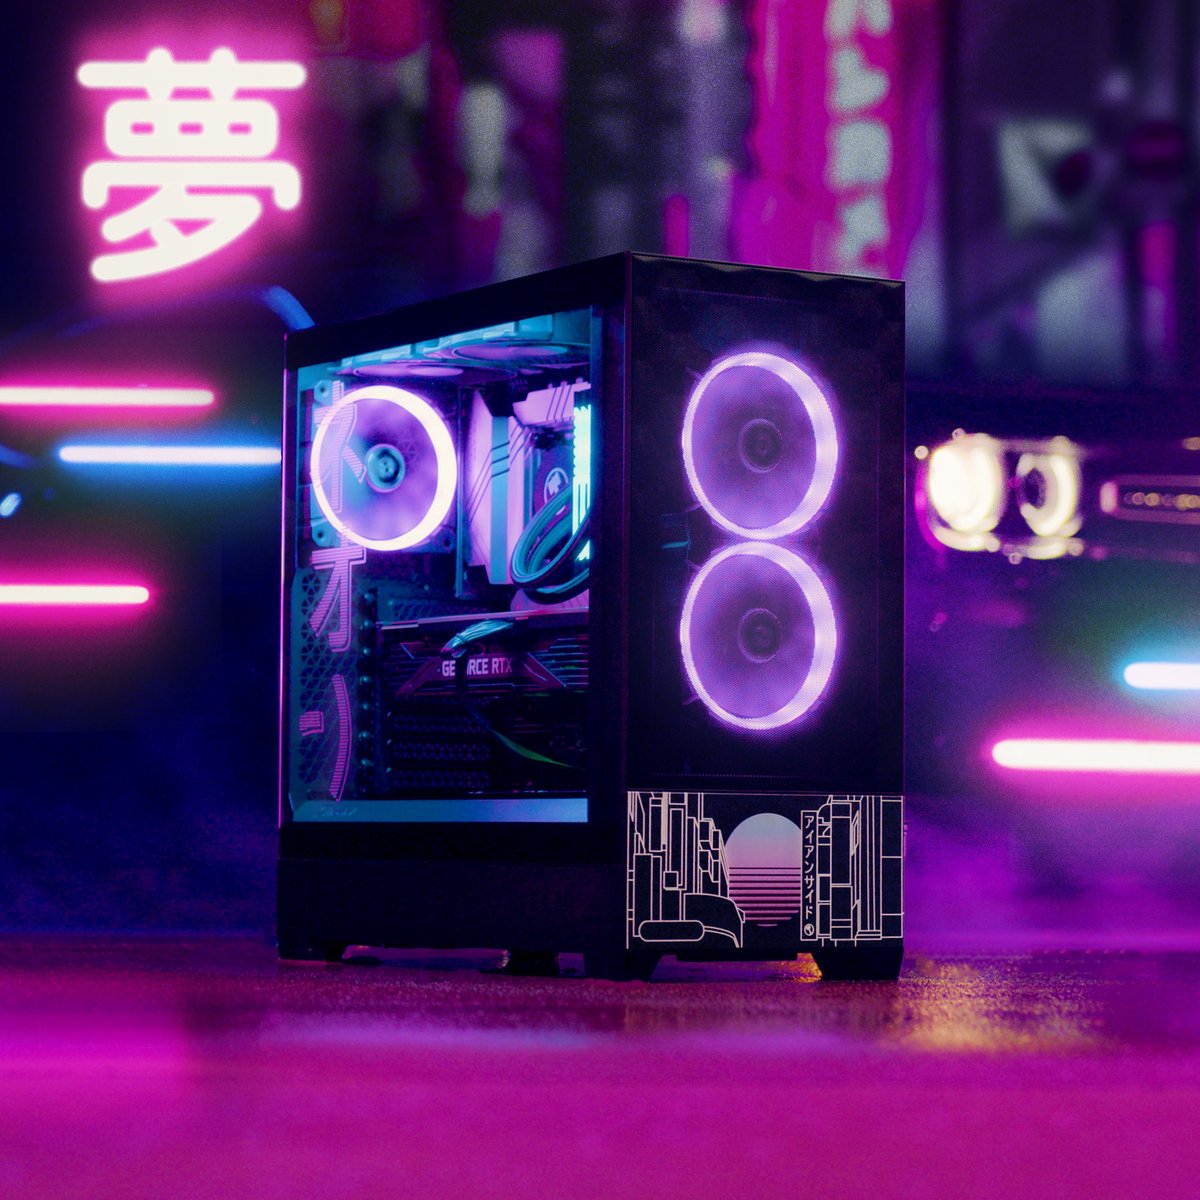 FREE PC?! 👁️🫦👁️ Listen up nerds! We're finally announcing our Tokyo Dream PC giveaway and we think you're gonna love it! 👀 To enter and increase your chances: Make sure you're following us! Like/RT this post! Enter here: gleam.io/WW0xf/ironside…